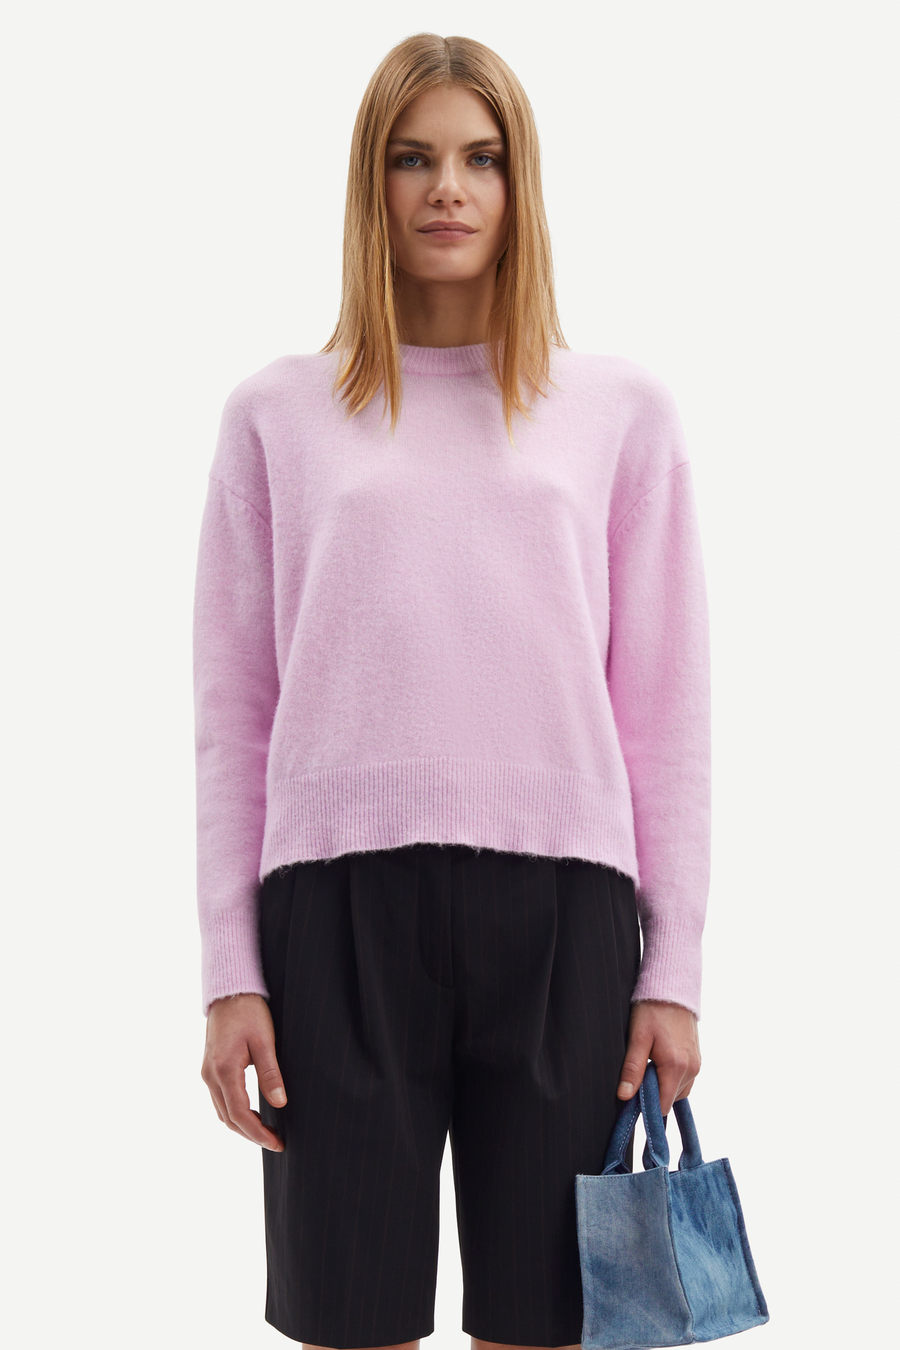 SAMSOE SAMSOE ANOUR IN LILAC SNOW - PULLOVER RUNDHALS PUDER LILA